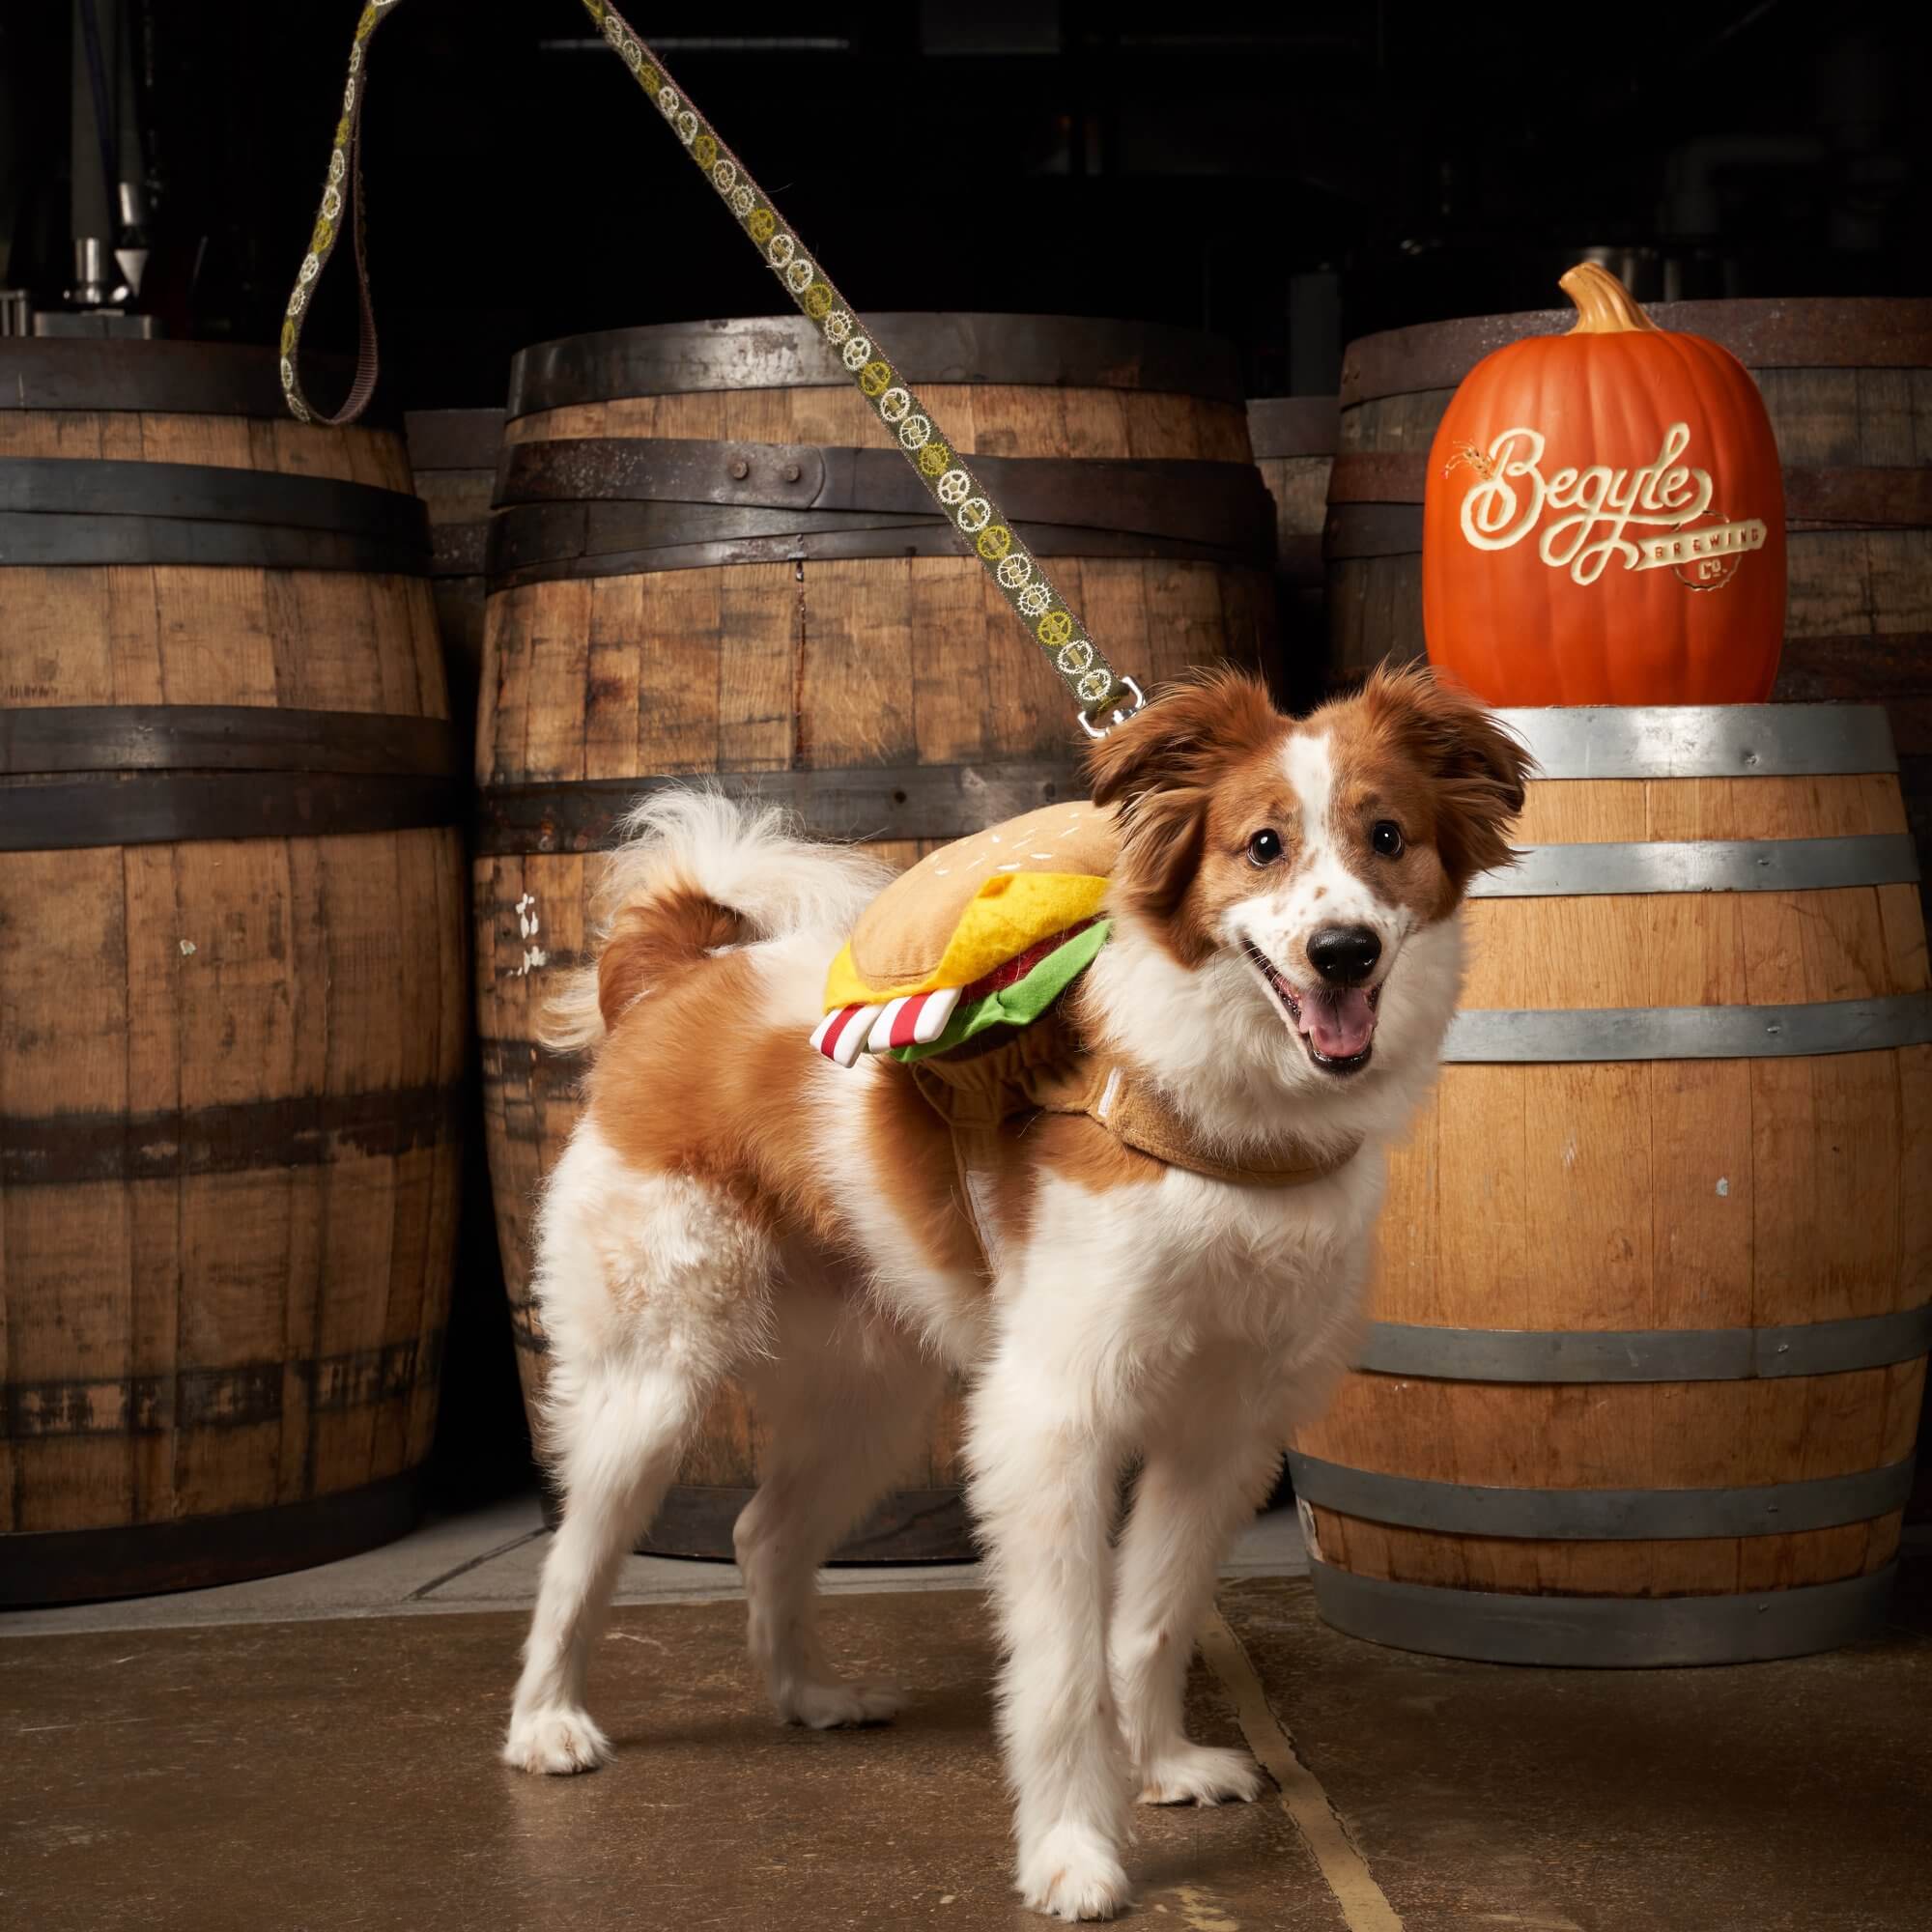 Dog-friendly chicago brewery - Begyle Brewing Co